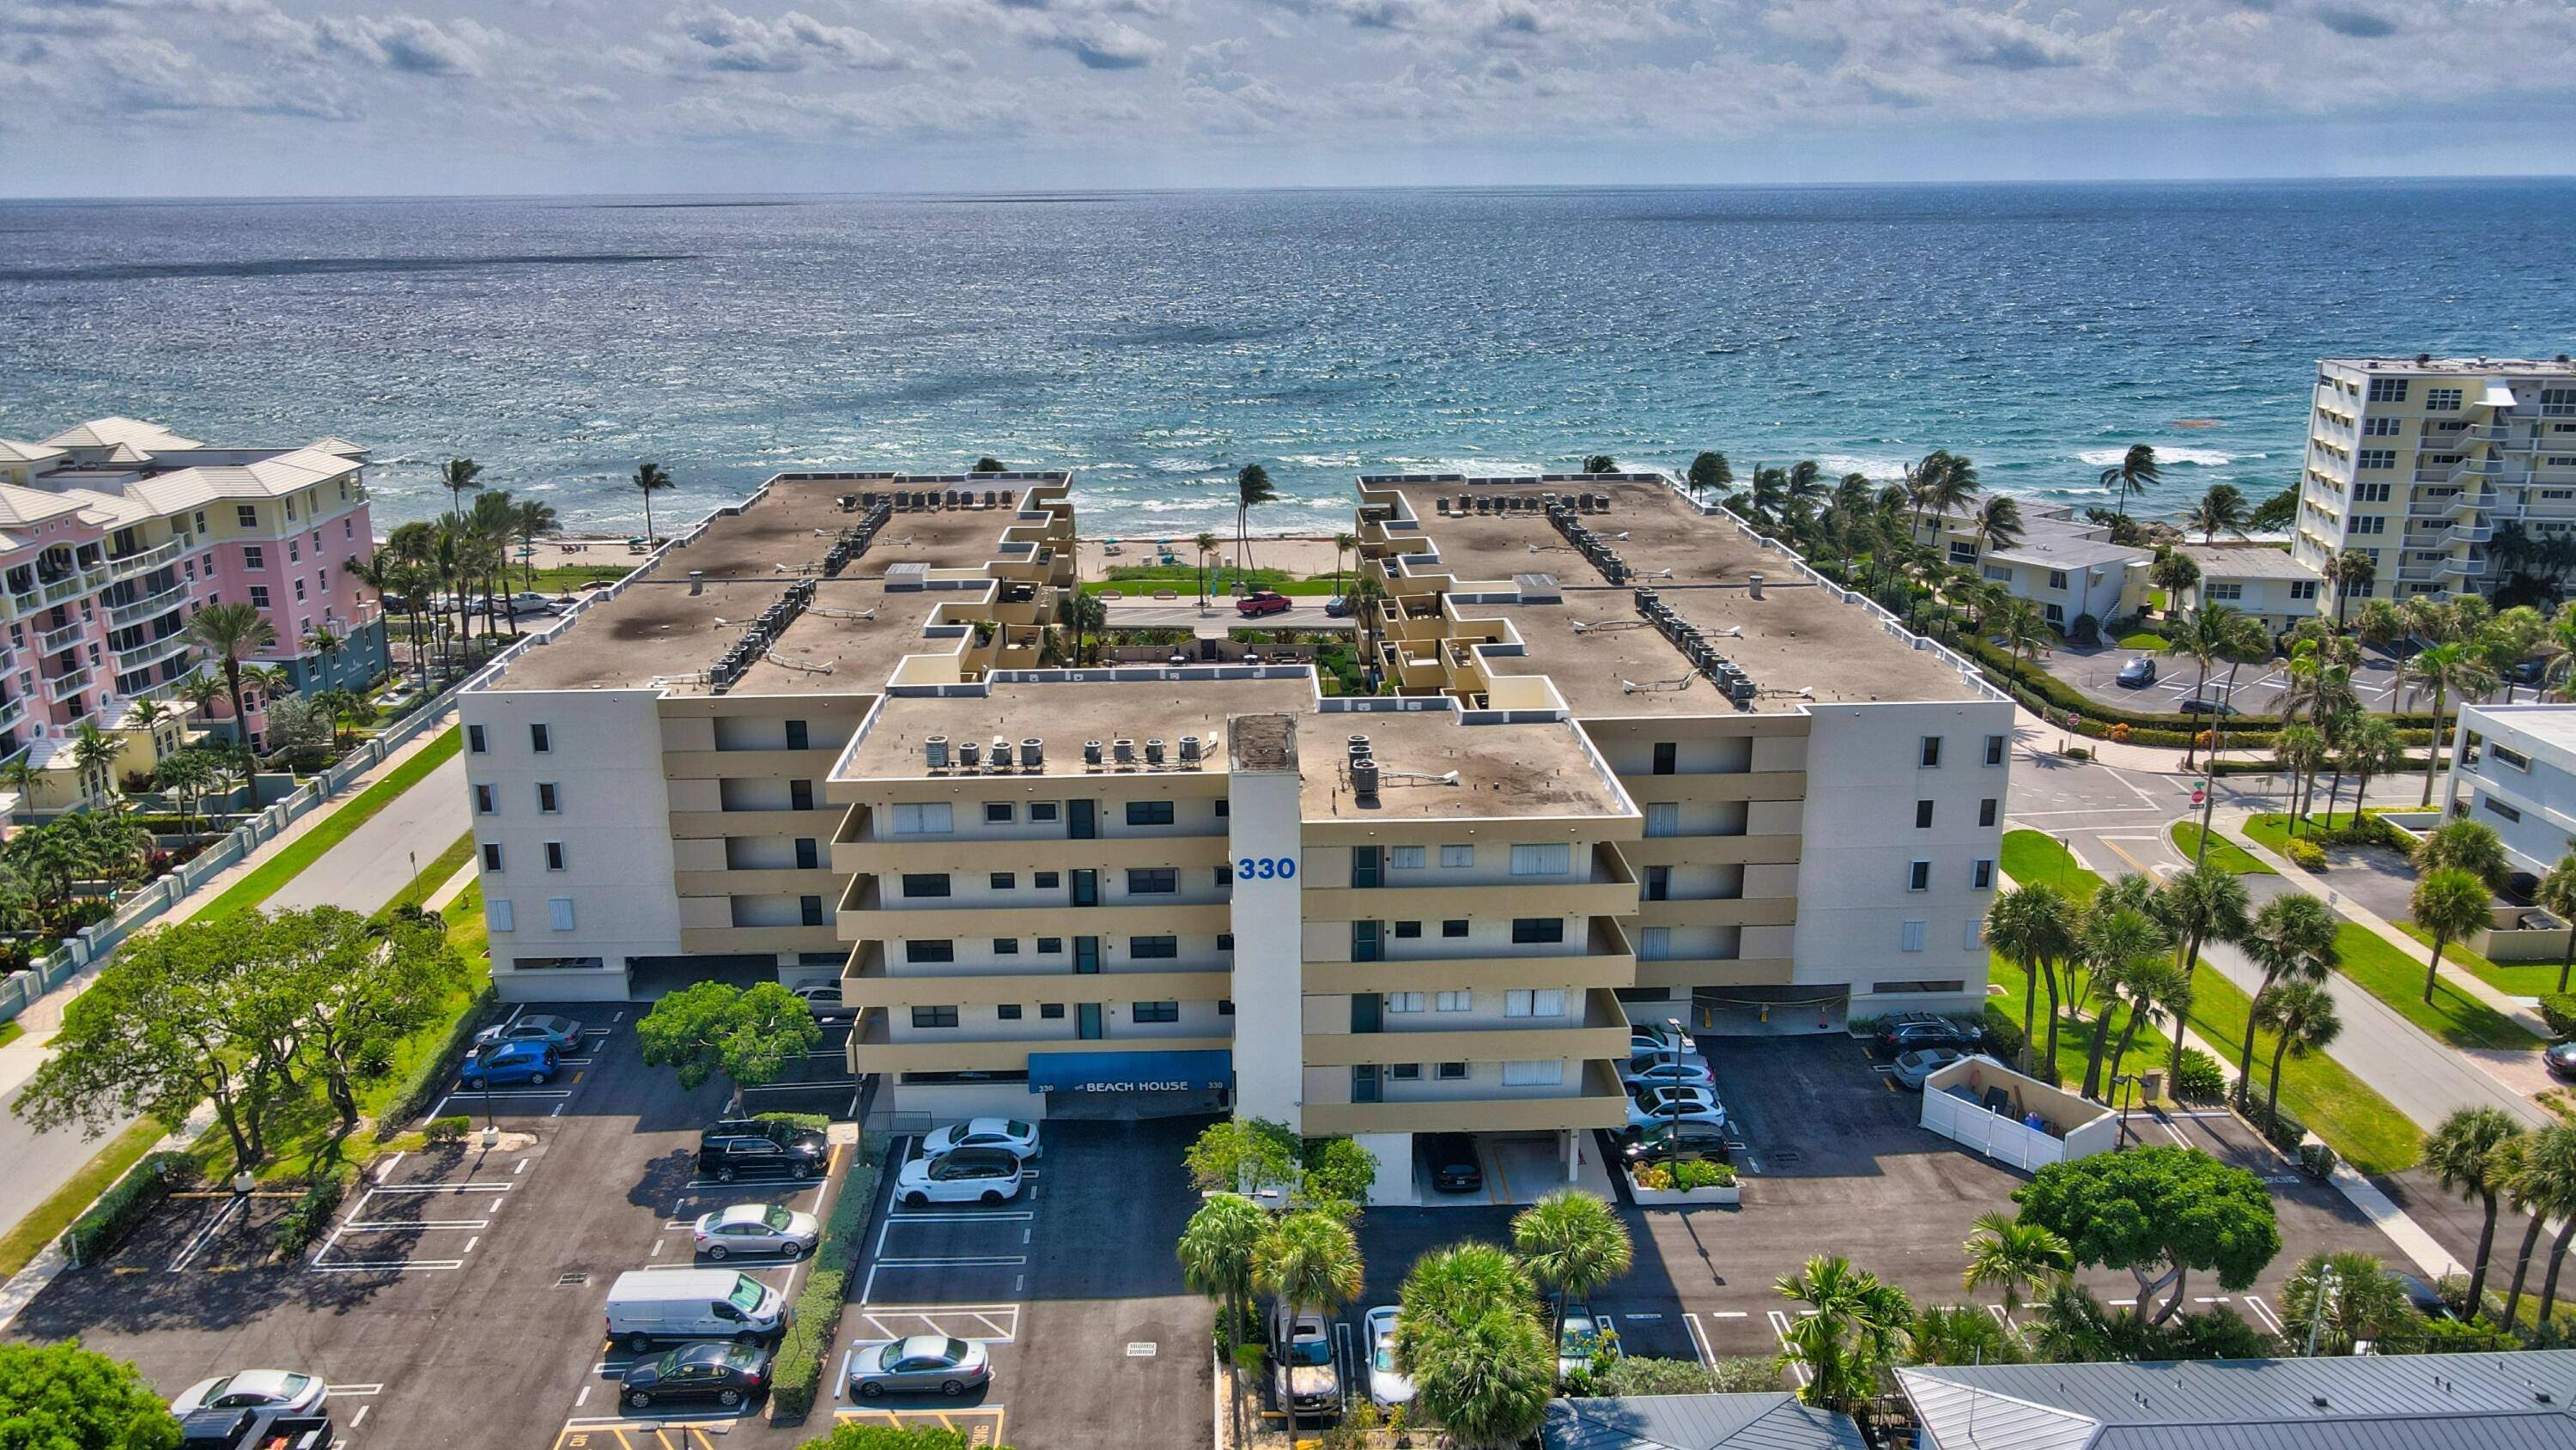 Beautiful 1 bedroom, 1. 5 bathroom beach view condo is ready for a new owner.